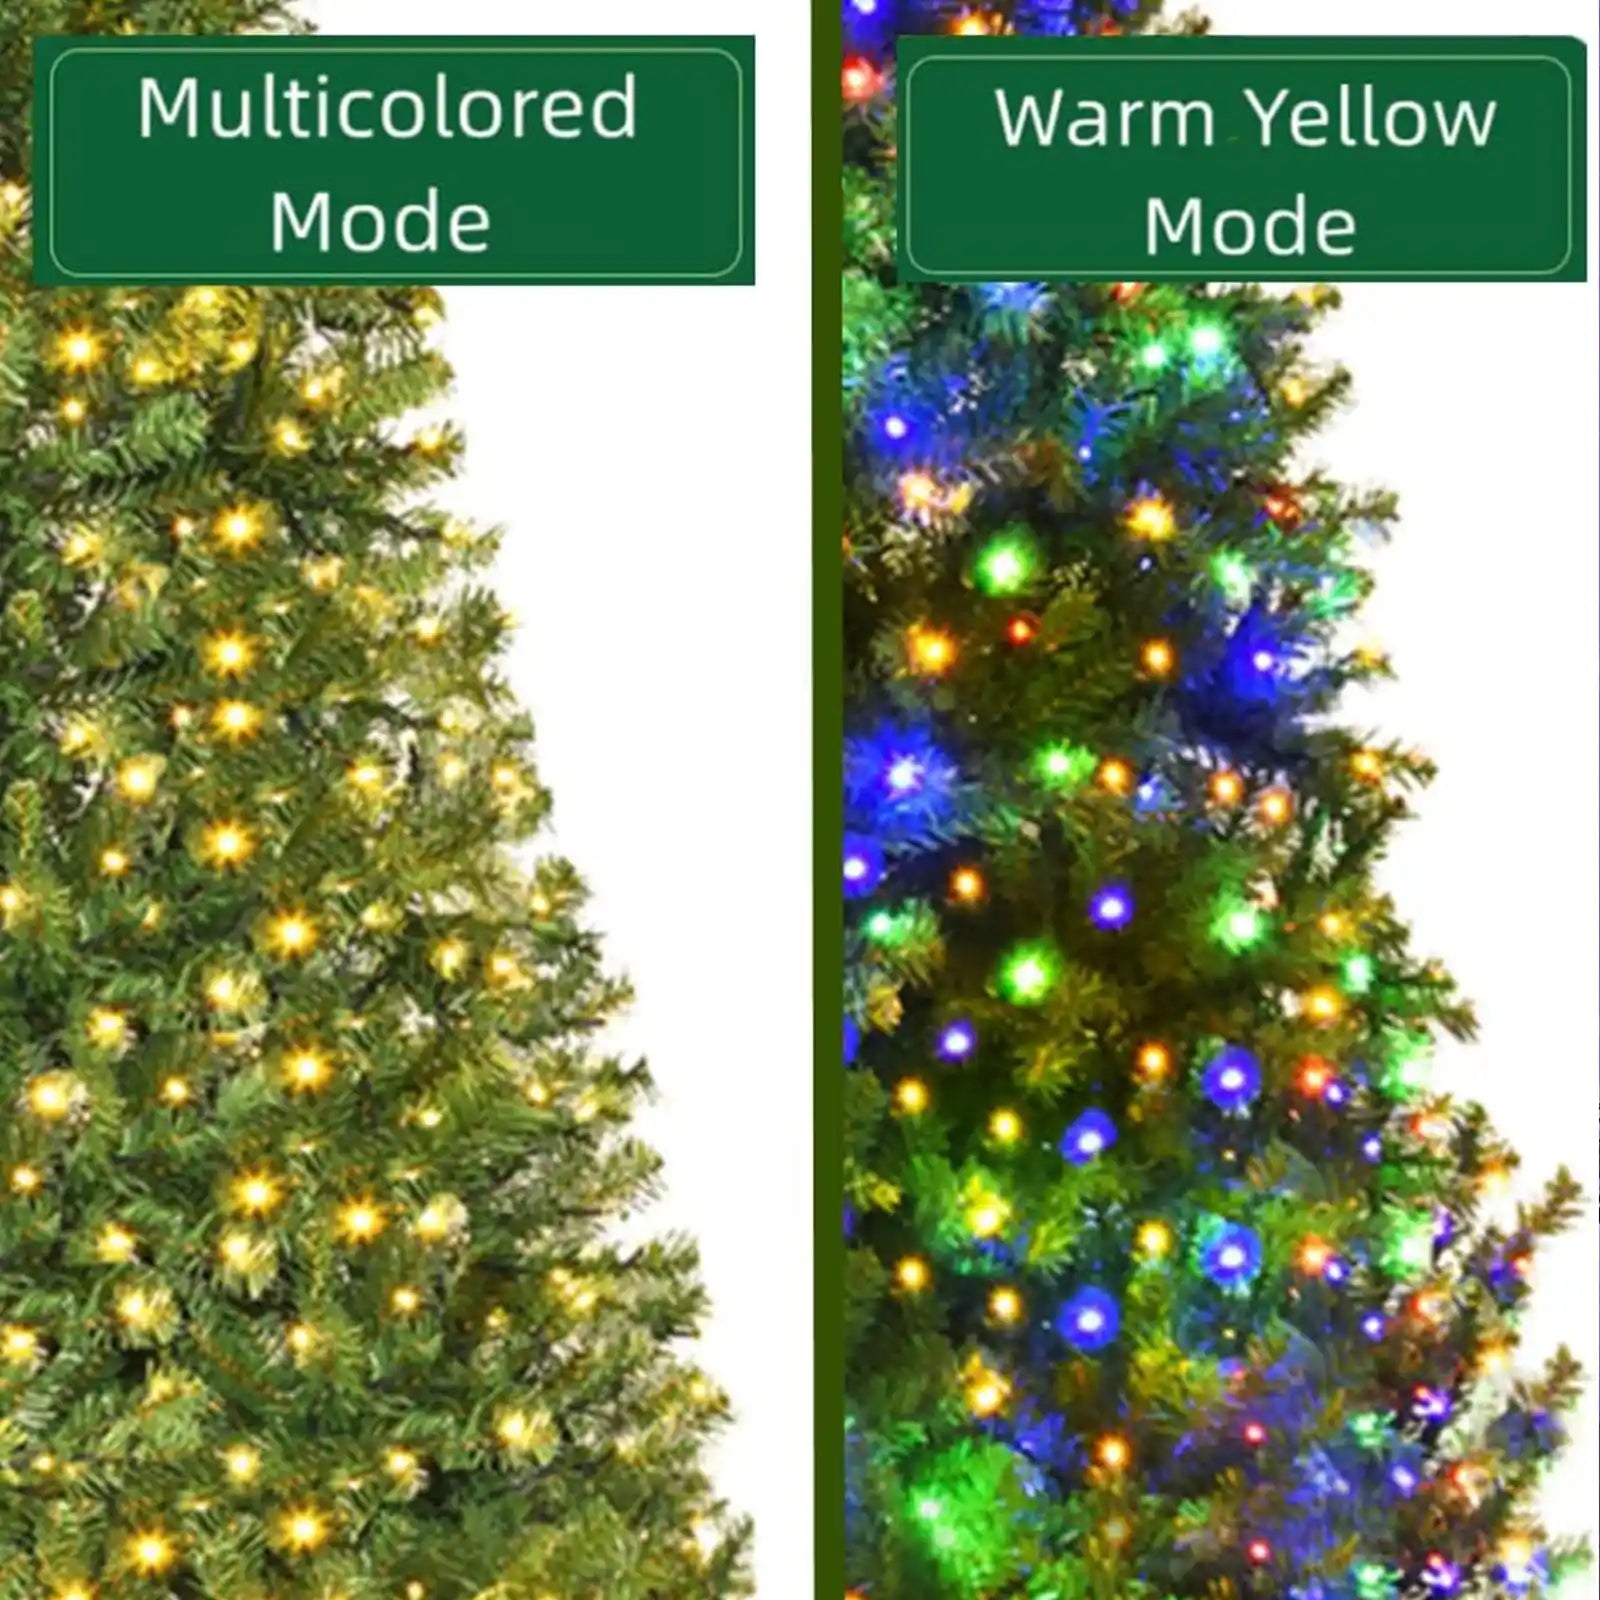 8FT Prelit Christmas Tree with Light Multicolor LED & Warm White Color with 2129 Branches Tips Full Appearance for Holiday, Party & Home Decoration